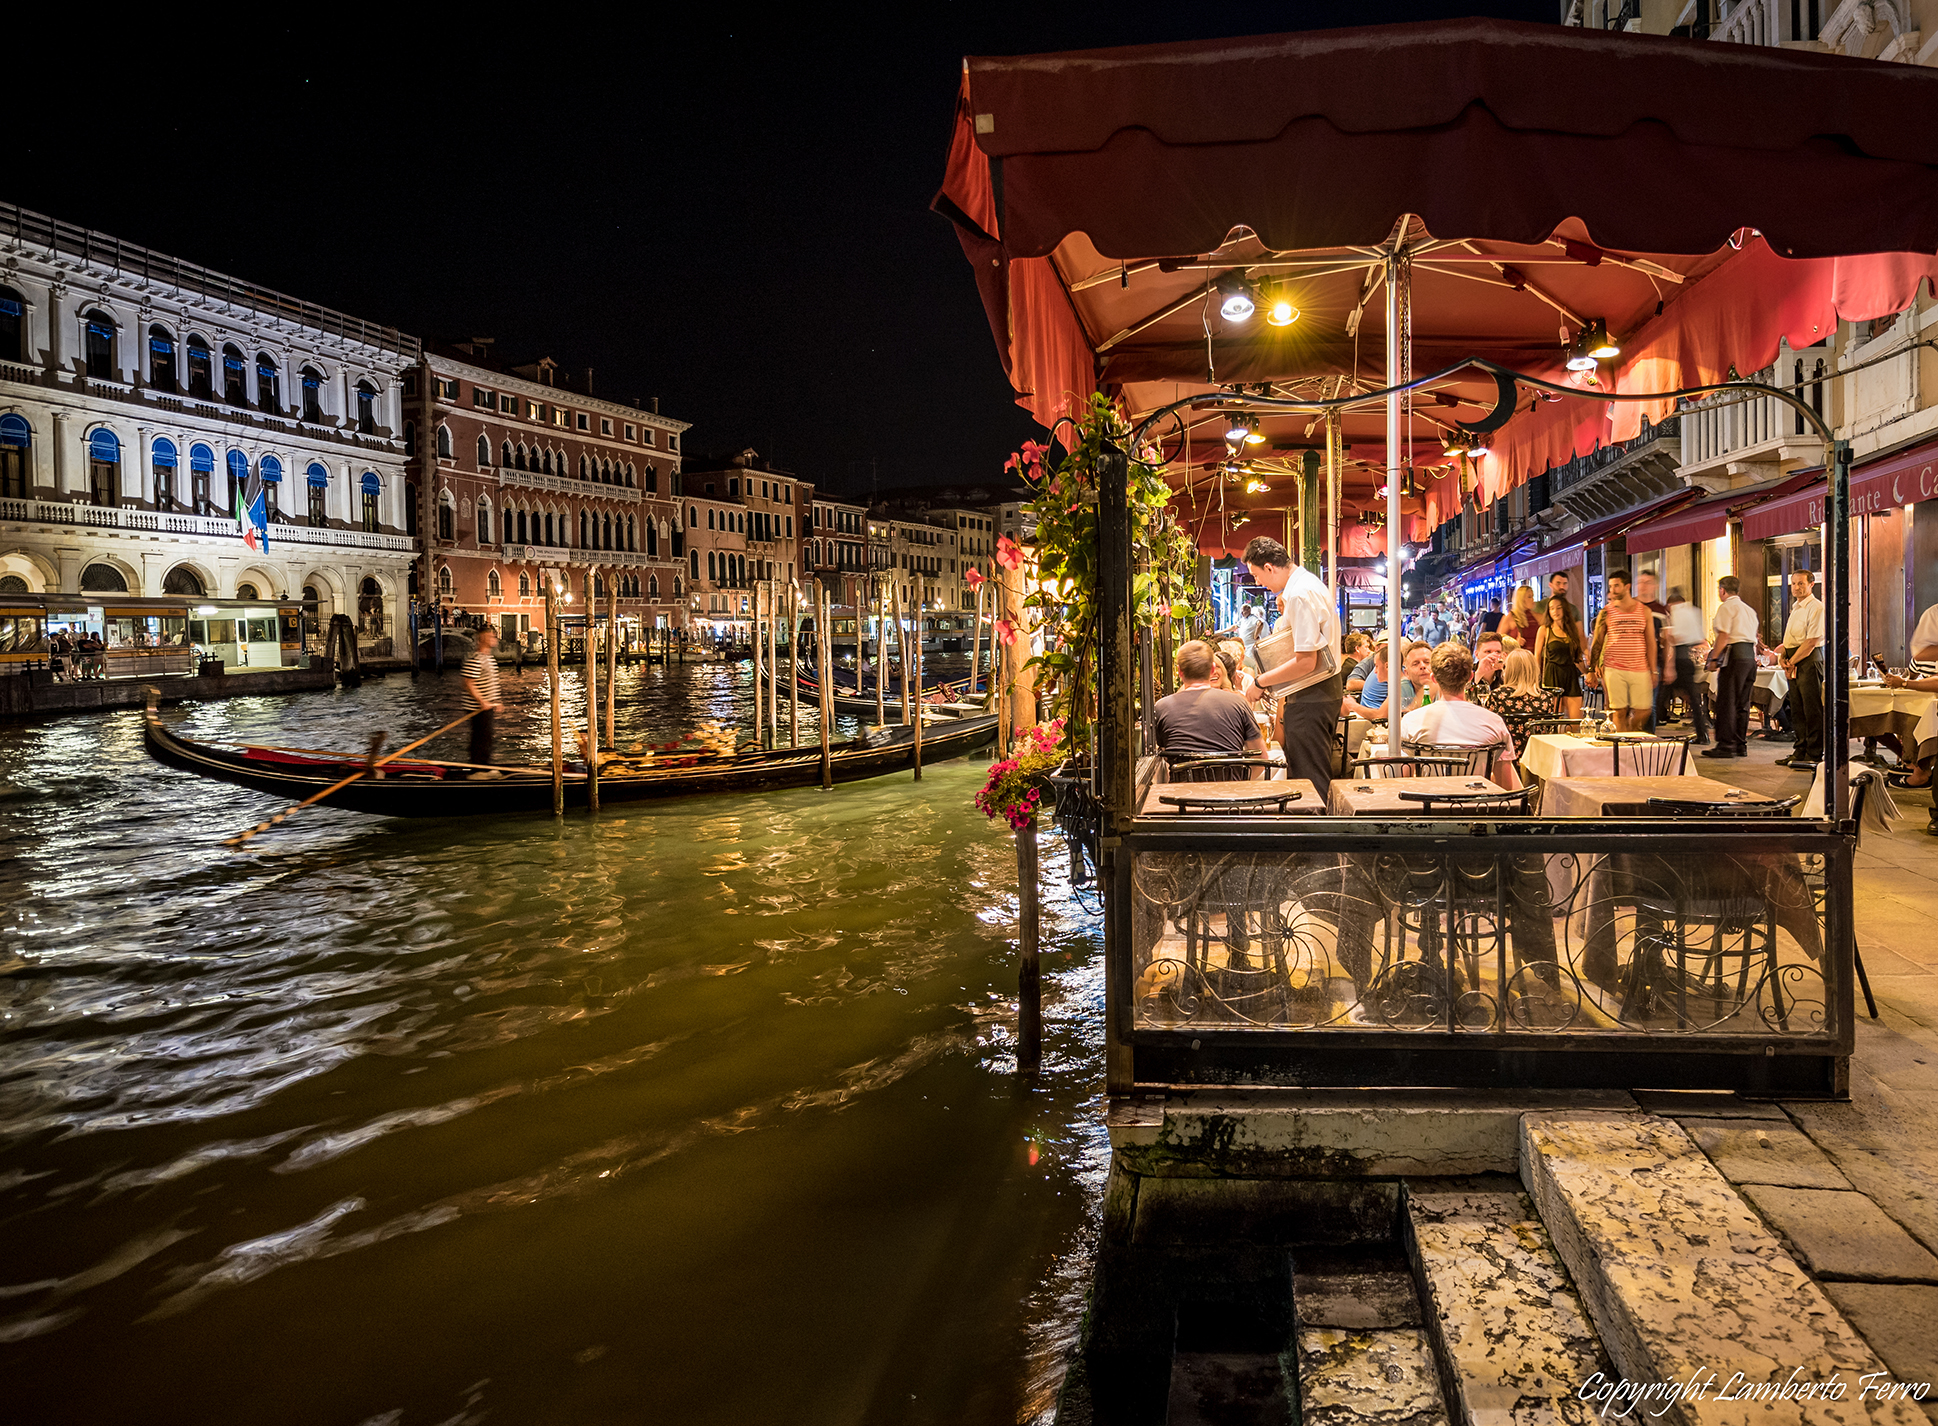 One evening in Venice...